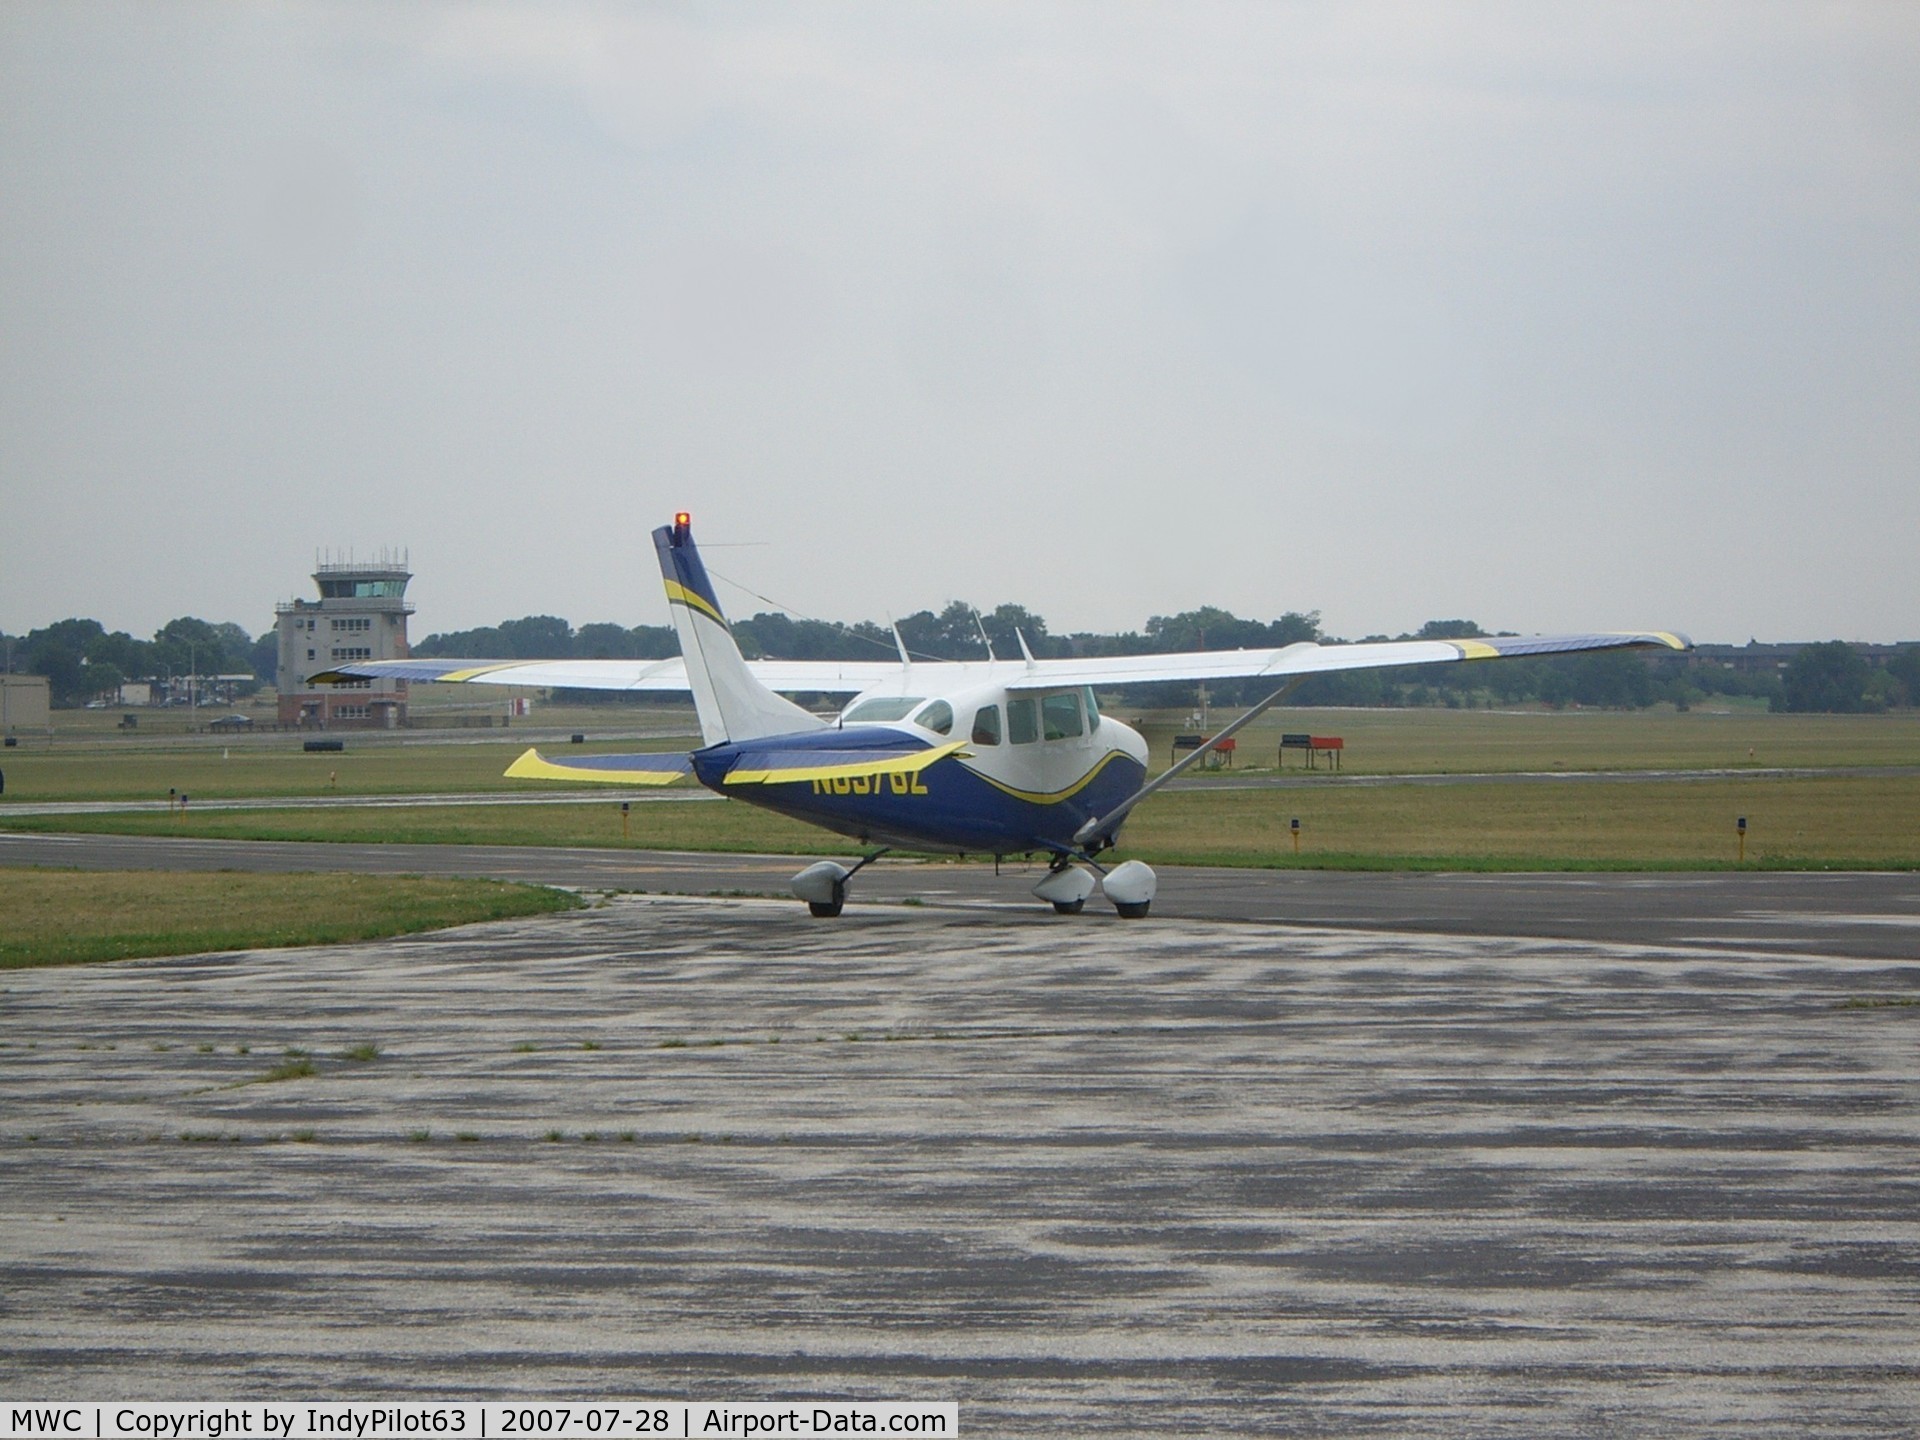 Lawrence J Timmerman Airport (MWC) - A nice tarmac shot with the tower in the backround